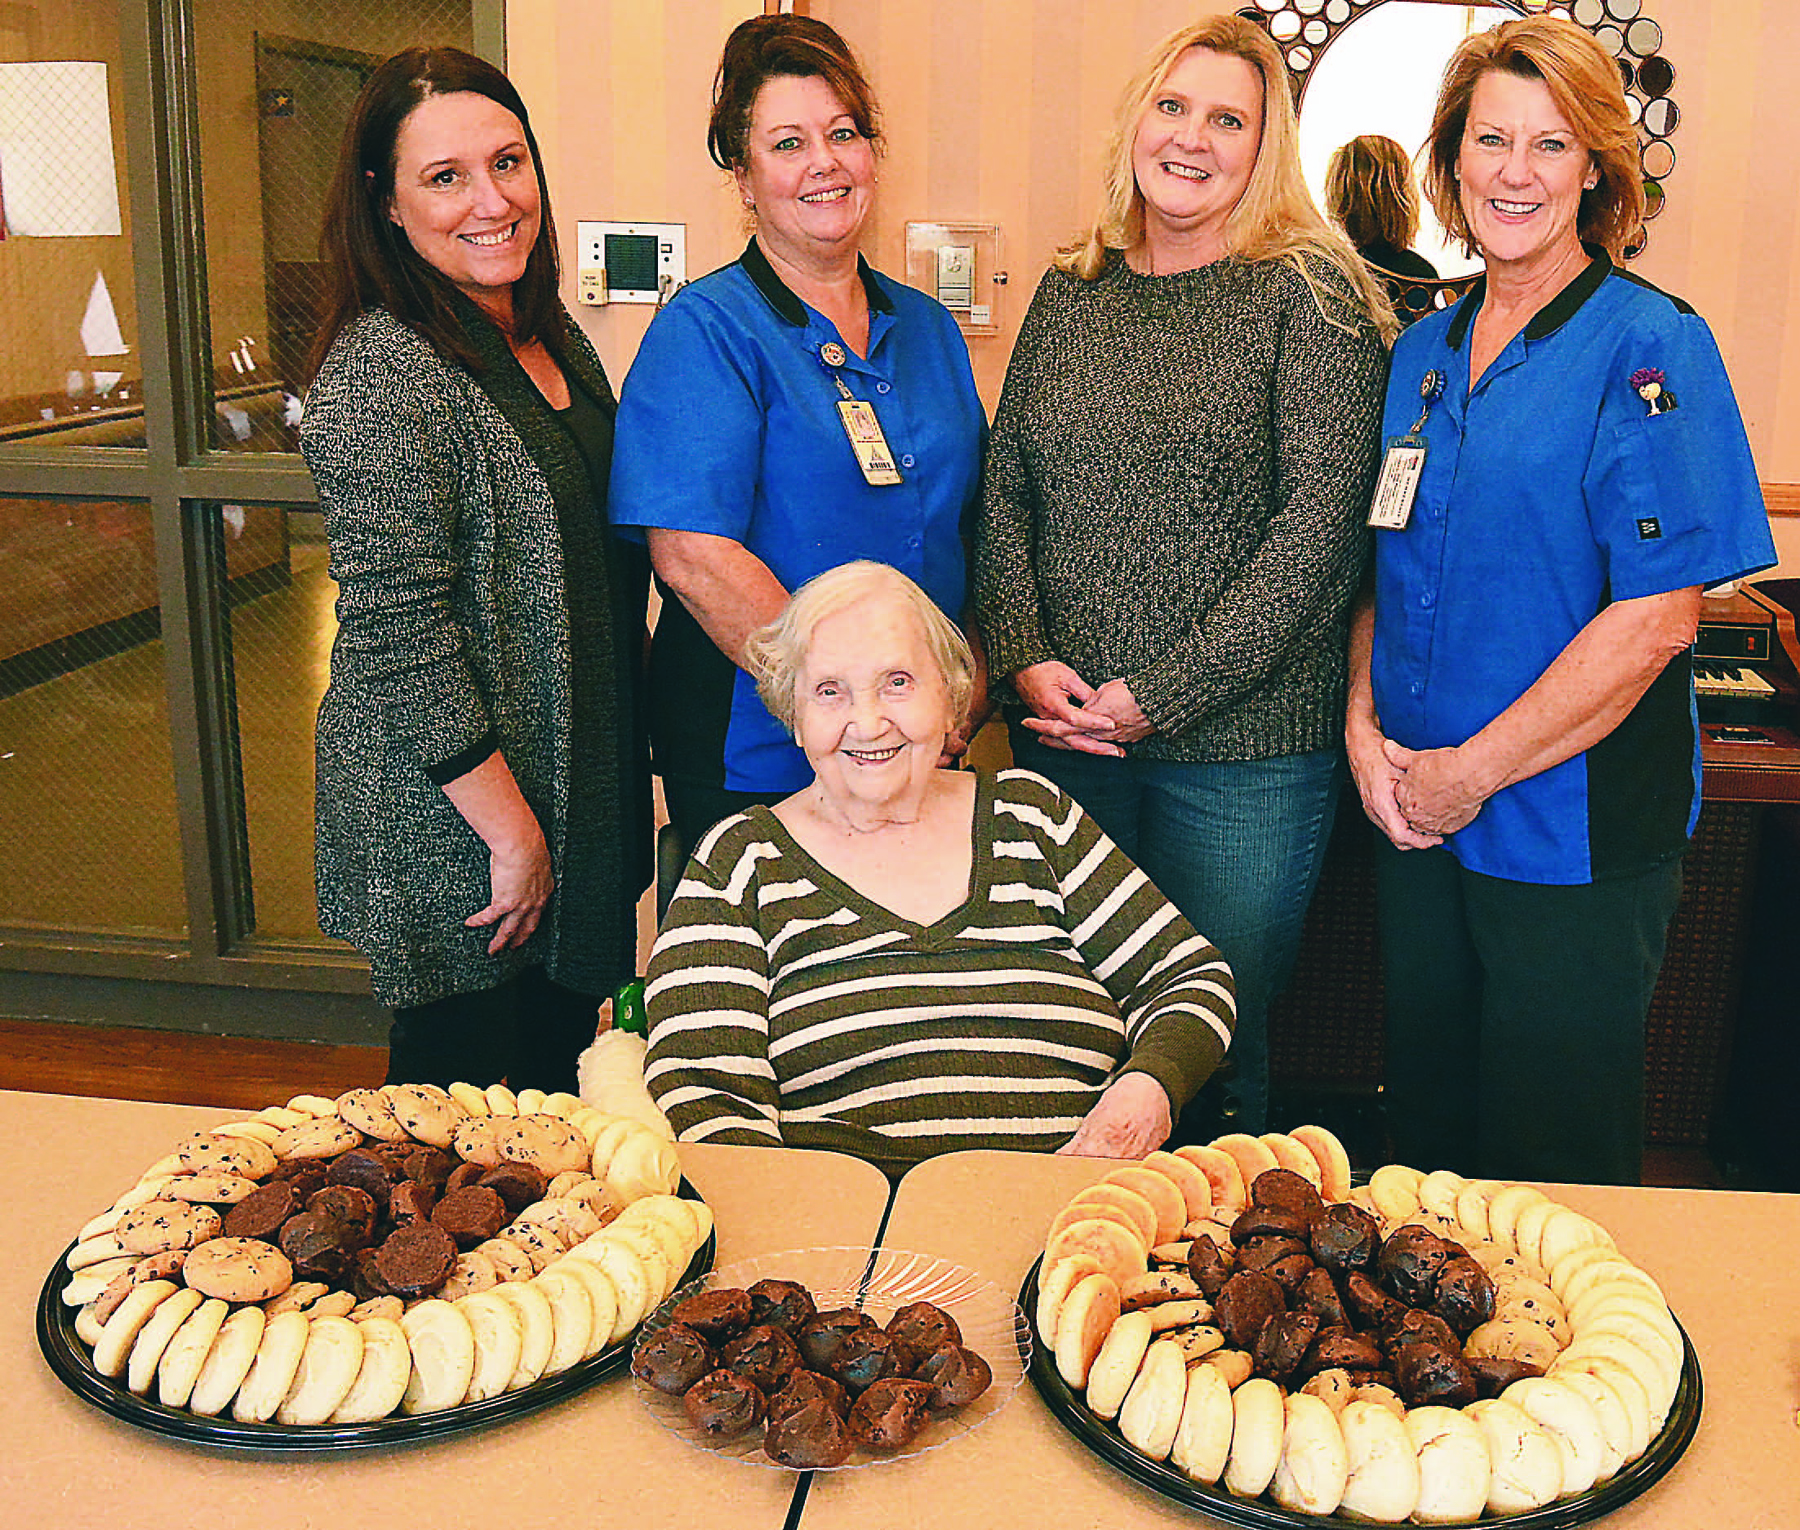 Longtime Leonard resident Mary Sue Sutherby (seated) celebrated her 100th birthday on Nov. 14 with 200 cookies brought to her by (from left) Ursula Tilley, Patty Silorey, Amy Bellamy and Jean Precour, all employees of Oxford Schools’ Food Service Department. Sutherby was the head cook for the Leonard and Lakeville schools until she retired in 1981. Happy birthday, Mrs. Sutherby! Photo by C.J. Carnacchio.